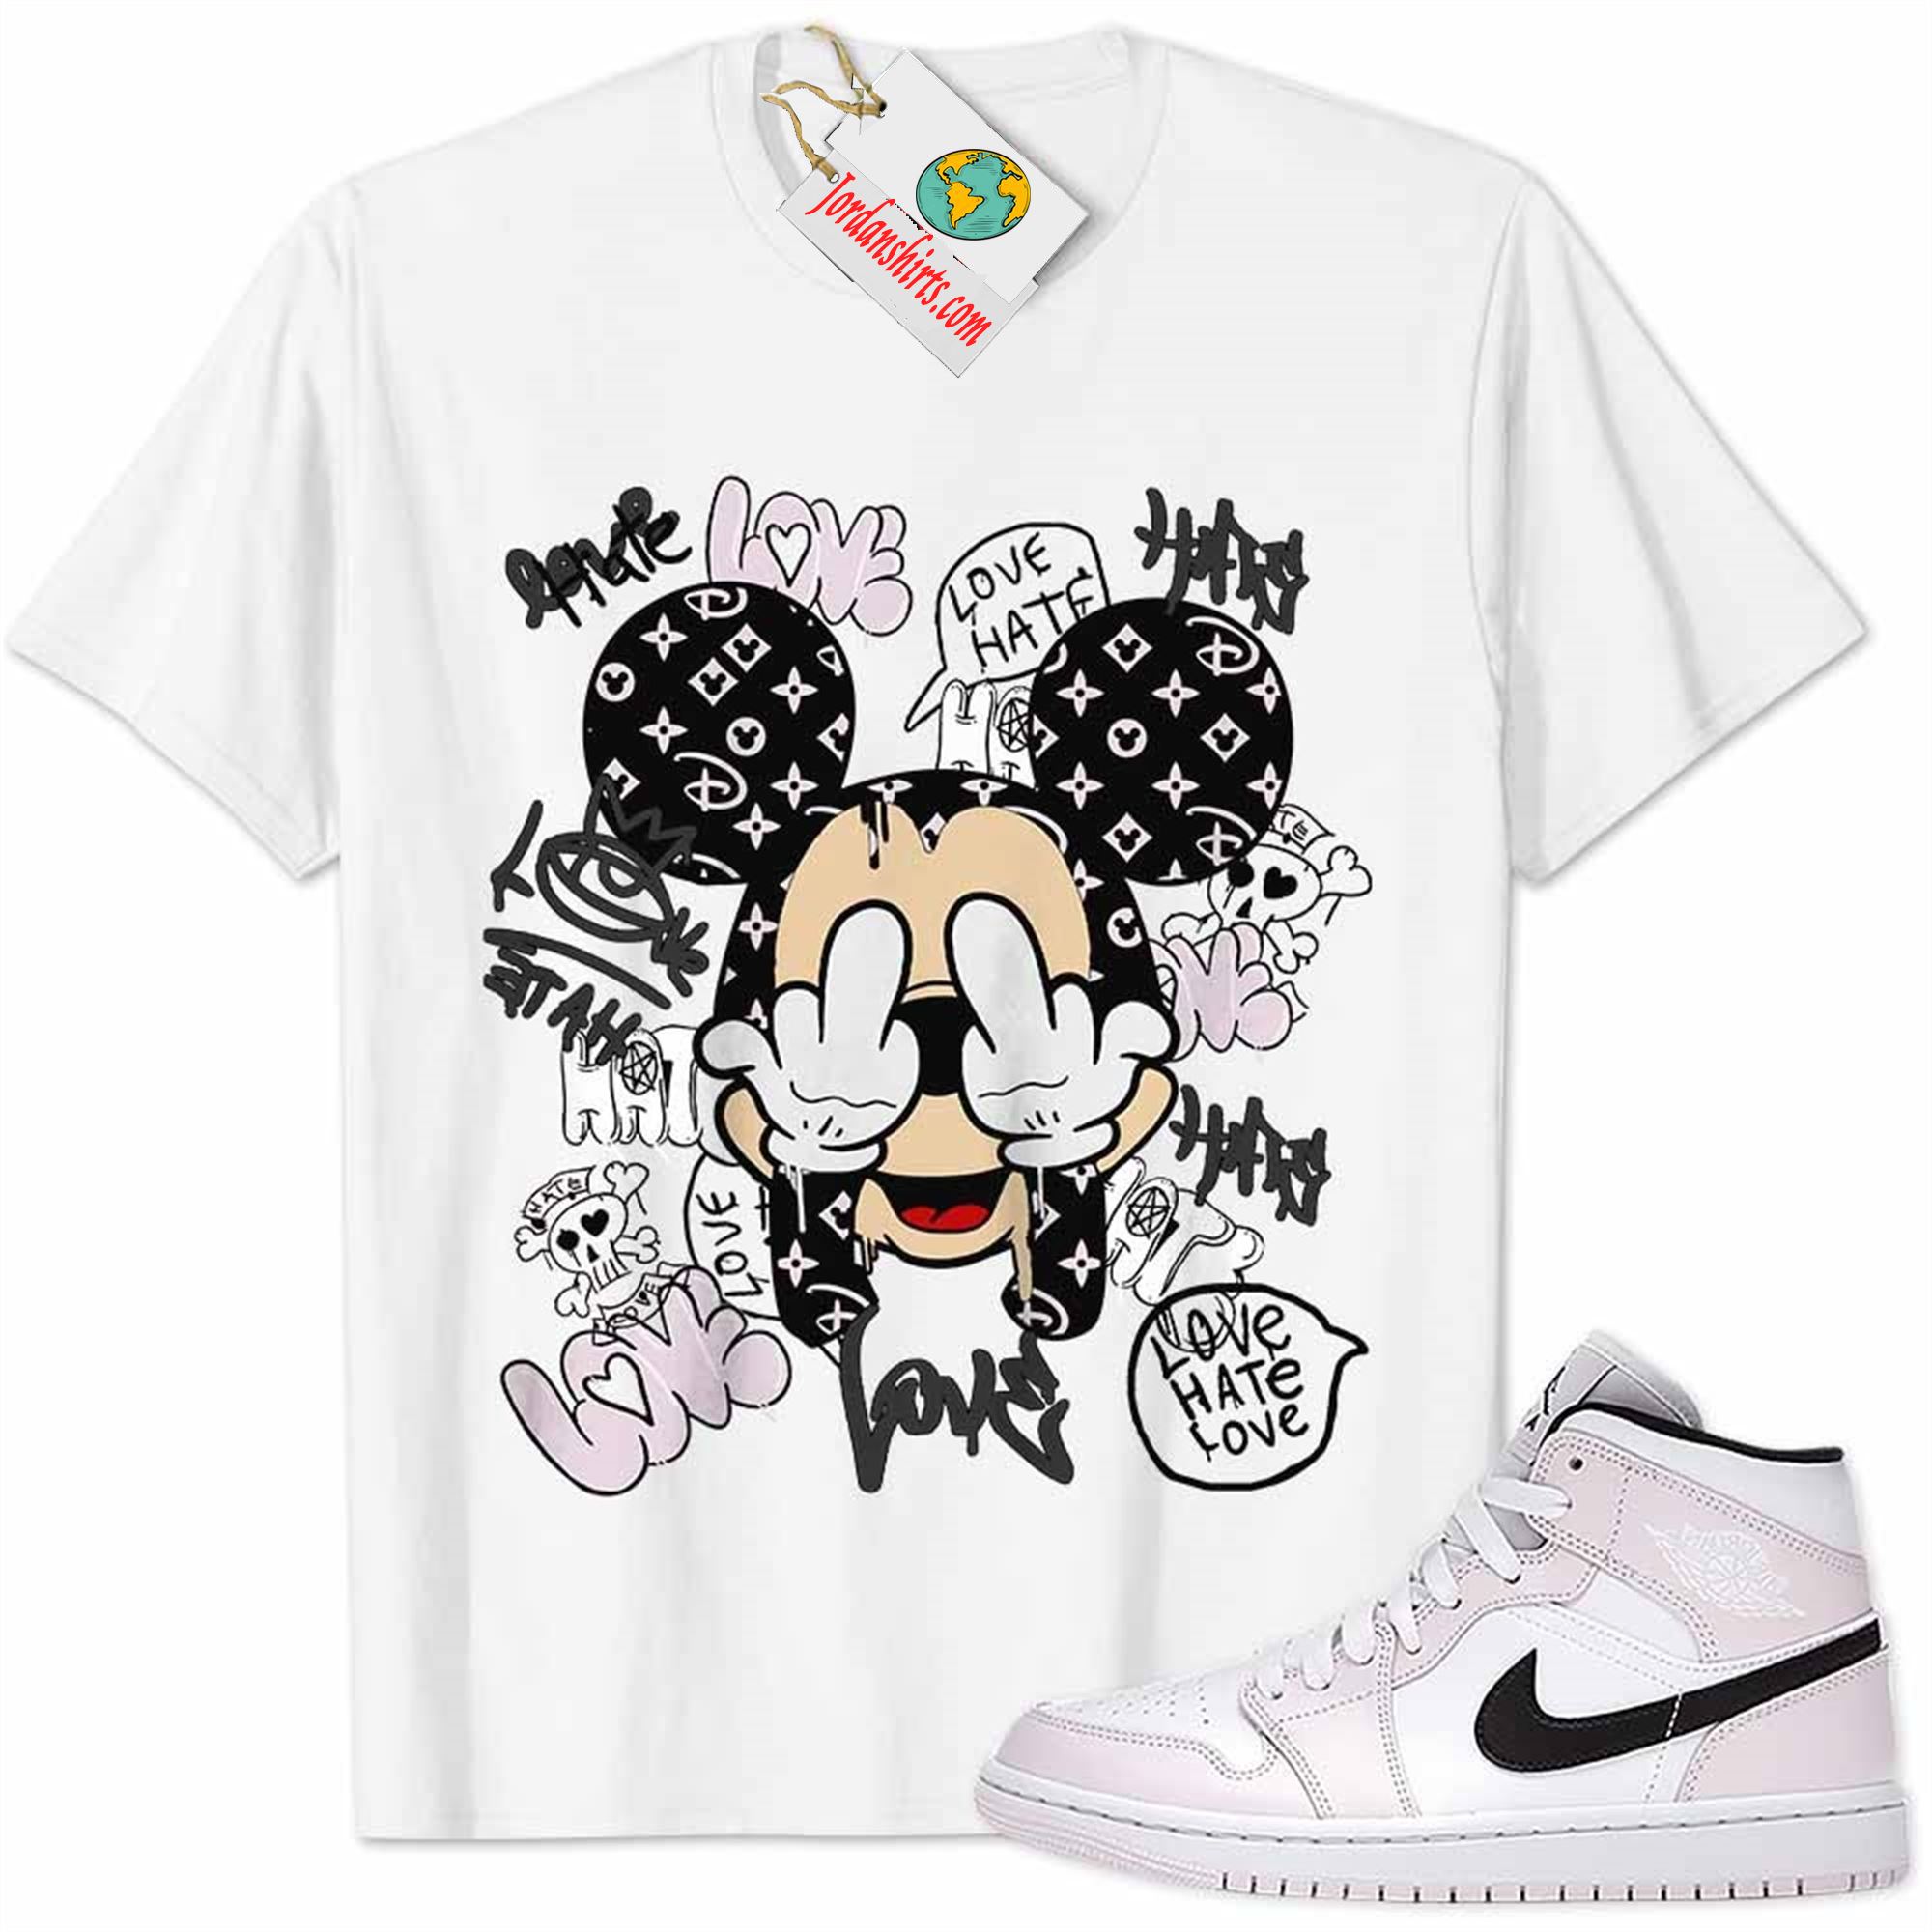 Jordan 1 Shirt, Barely Rose 1s Shirt Mickey Punch Middle Finger Love Hate White Plus Size Up To 5xl